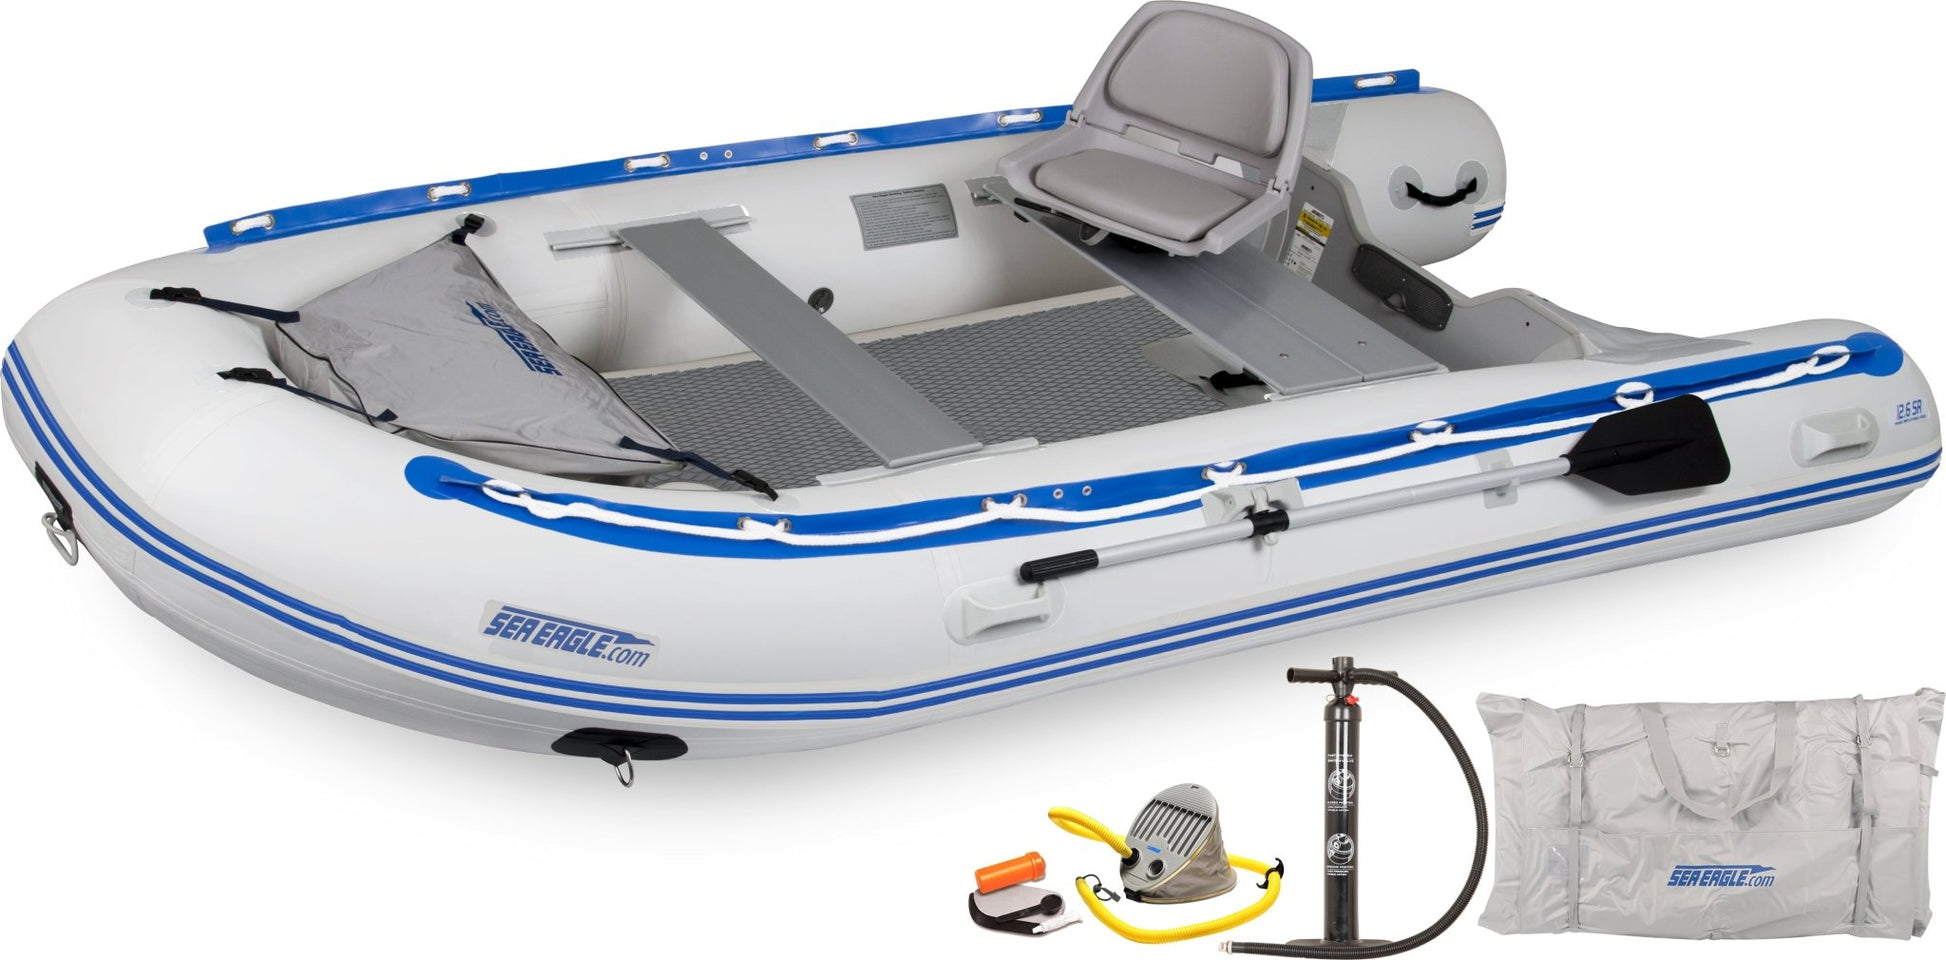 Sea Eagle 12'6" Sport Runabout Inflatable Boat - The Boat Outlet